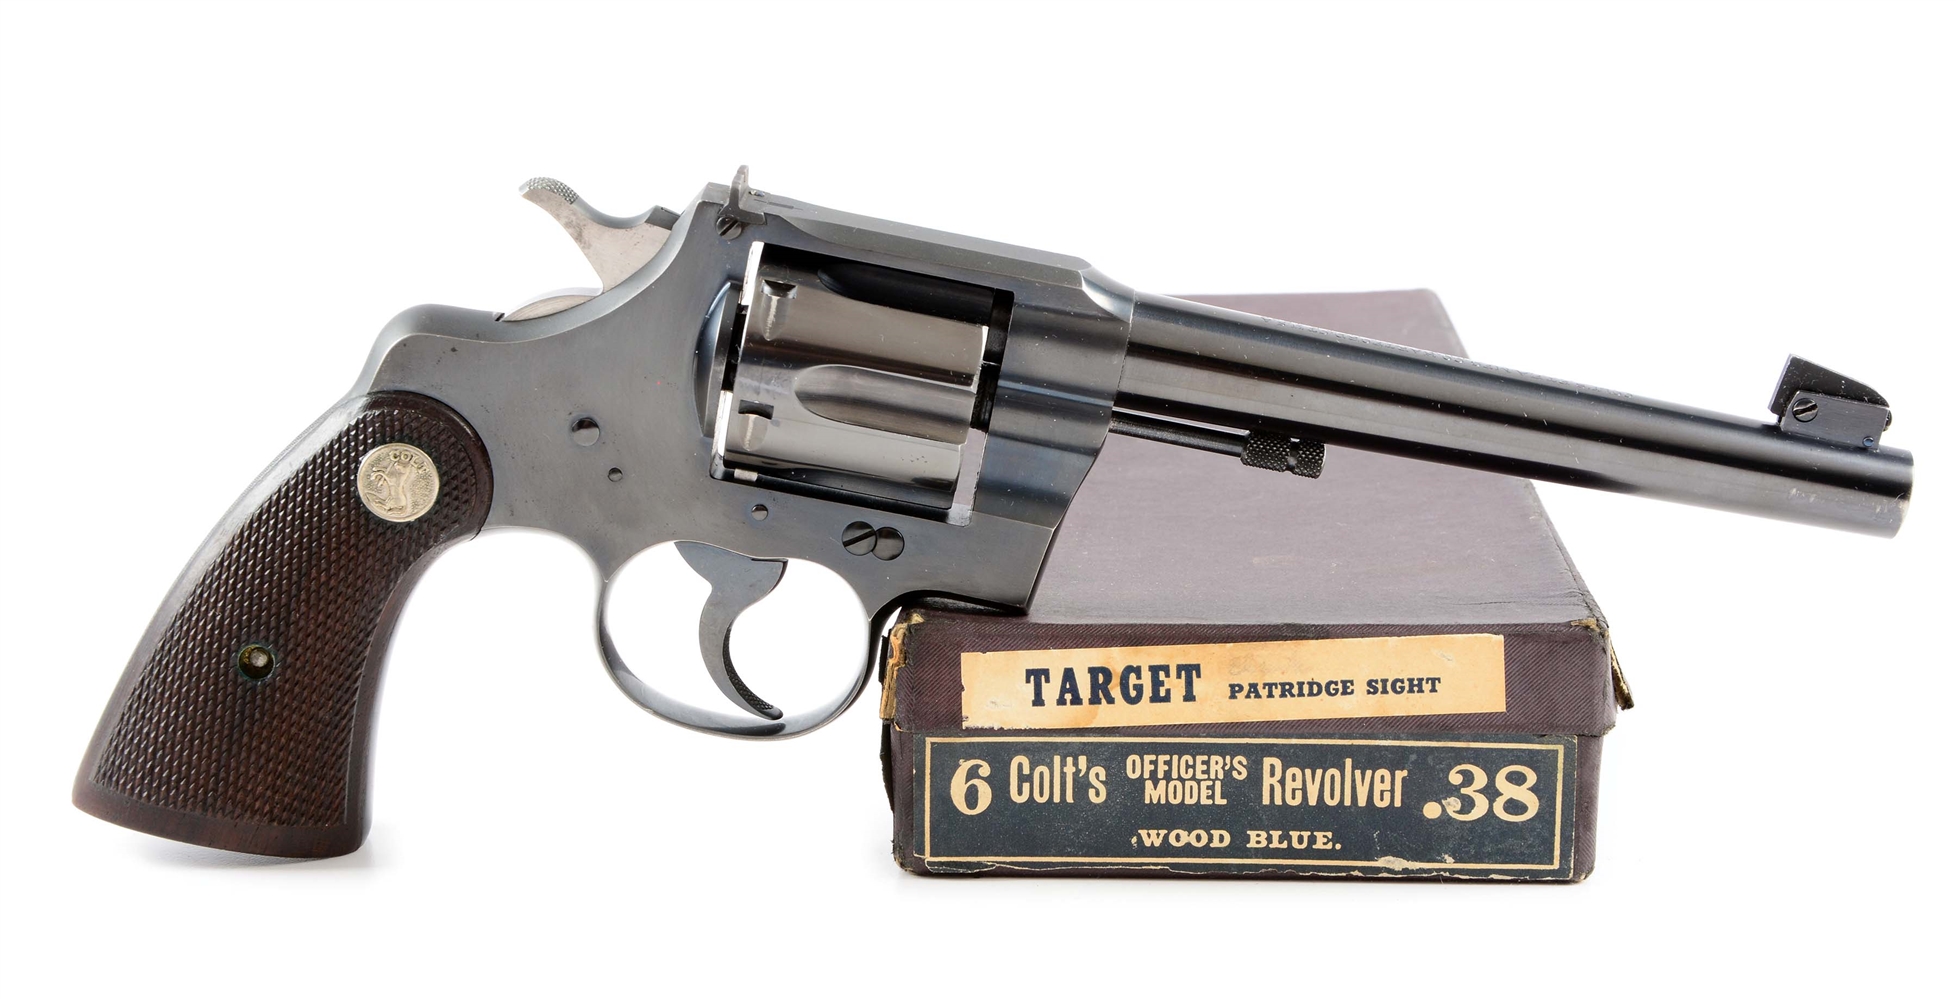 (C) BOXED COLT OFFICERS MODEL TARGET HEAVY BARREL DOUBLE ACTION REVOLVER (1940).